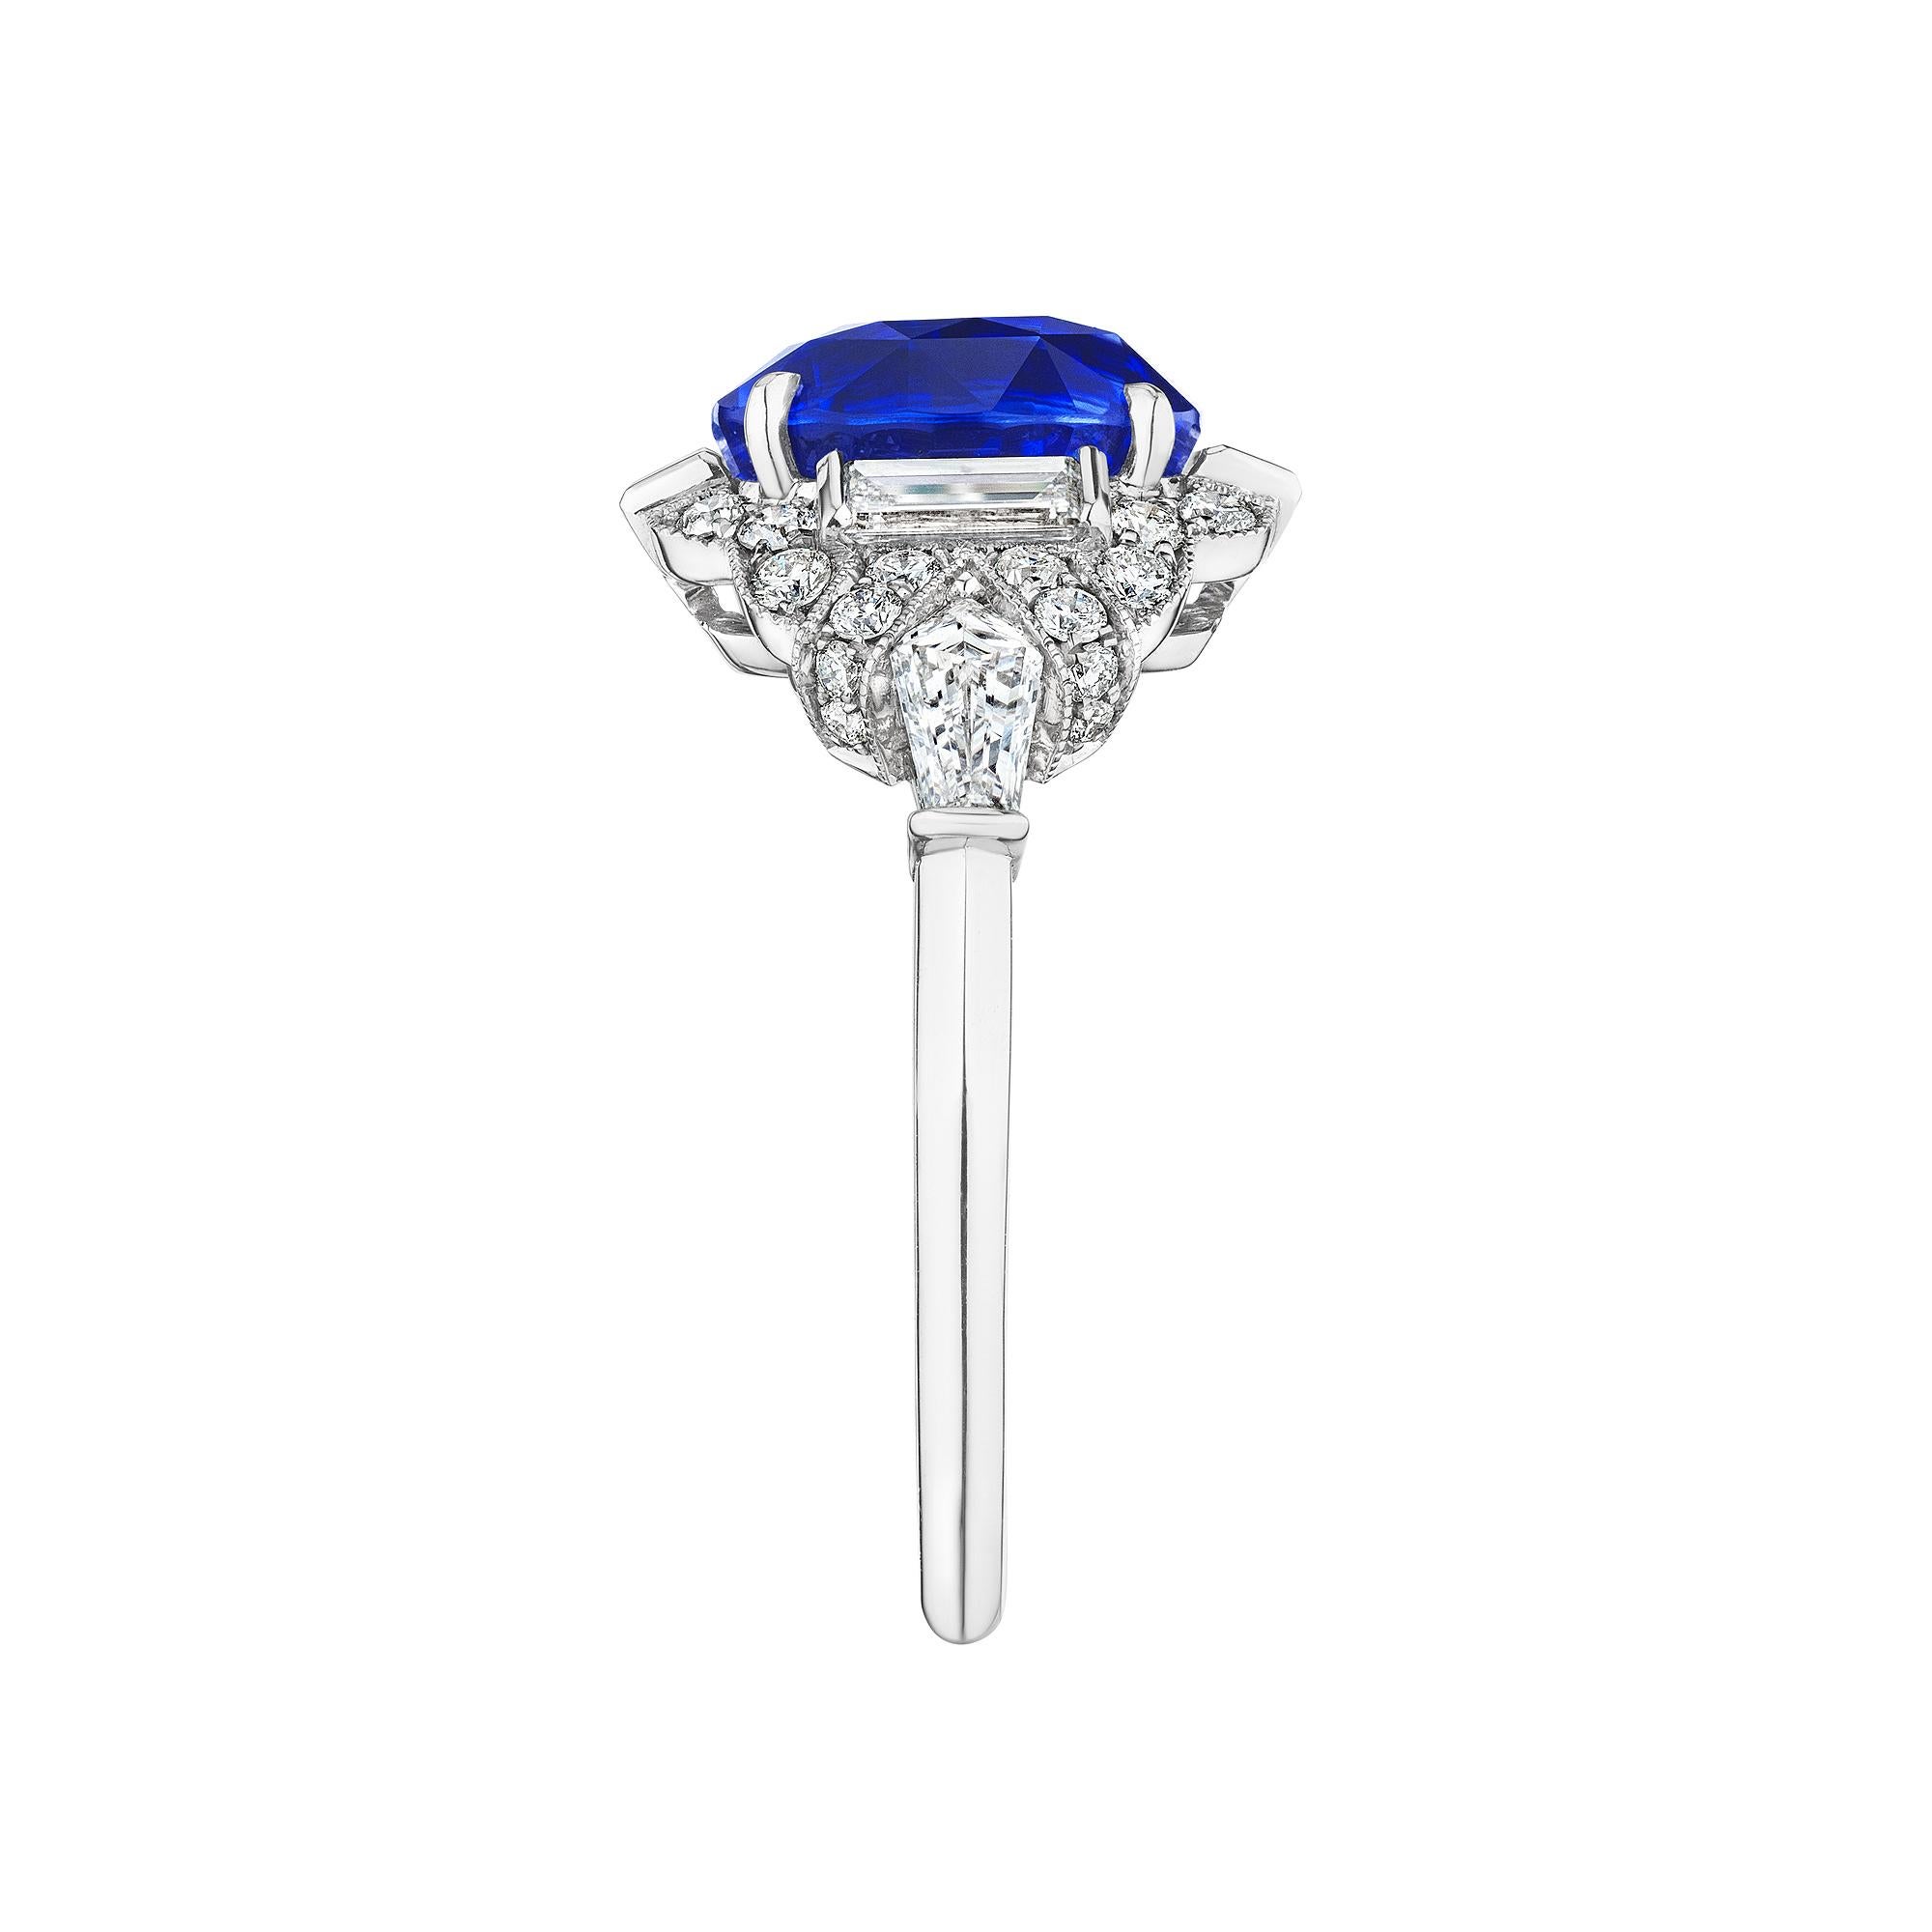 Looking as though it was plucked from a page of the Great Gatsby, this Art Deco style Raymond Yard natural (no heat) sapphire and diamond ring is pure elegance.  The center 3.53 oval cut sapphire is gracefully surrounded by two reverse